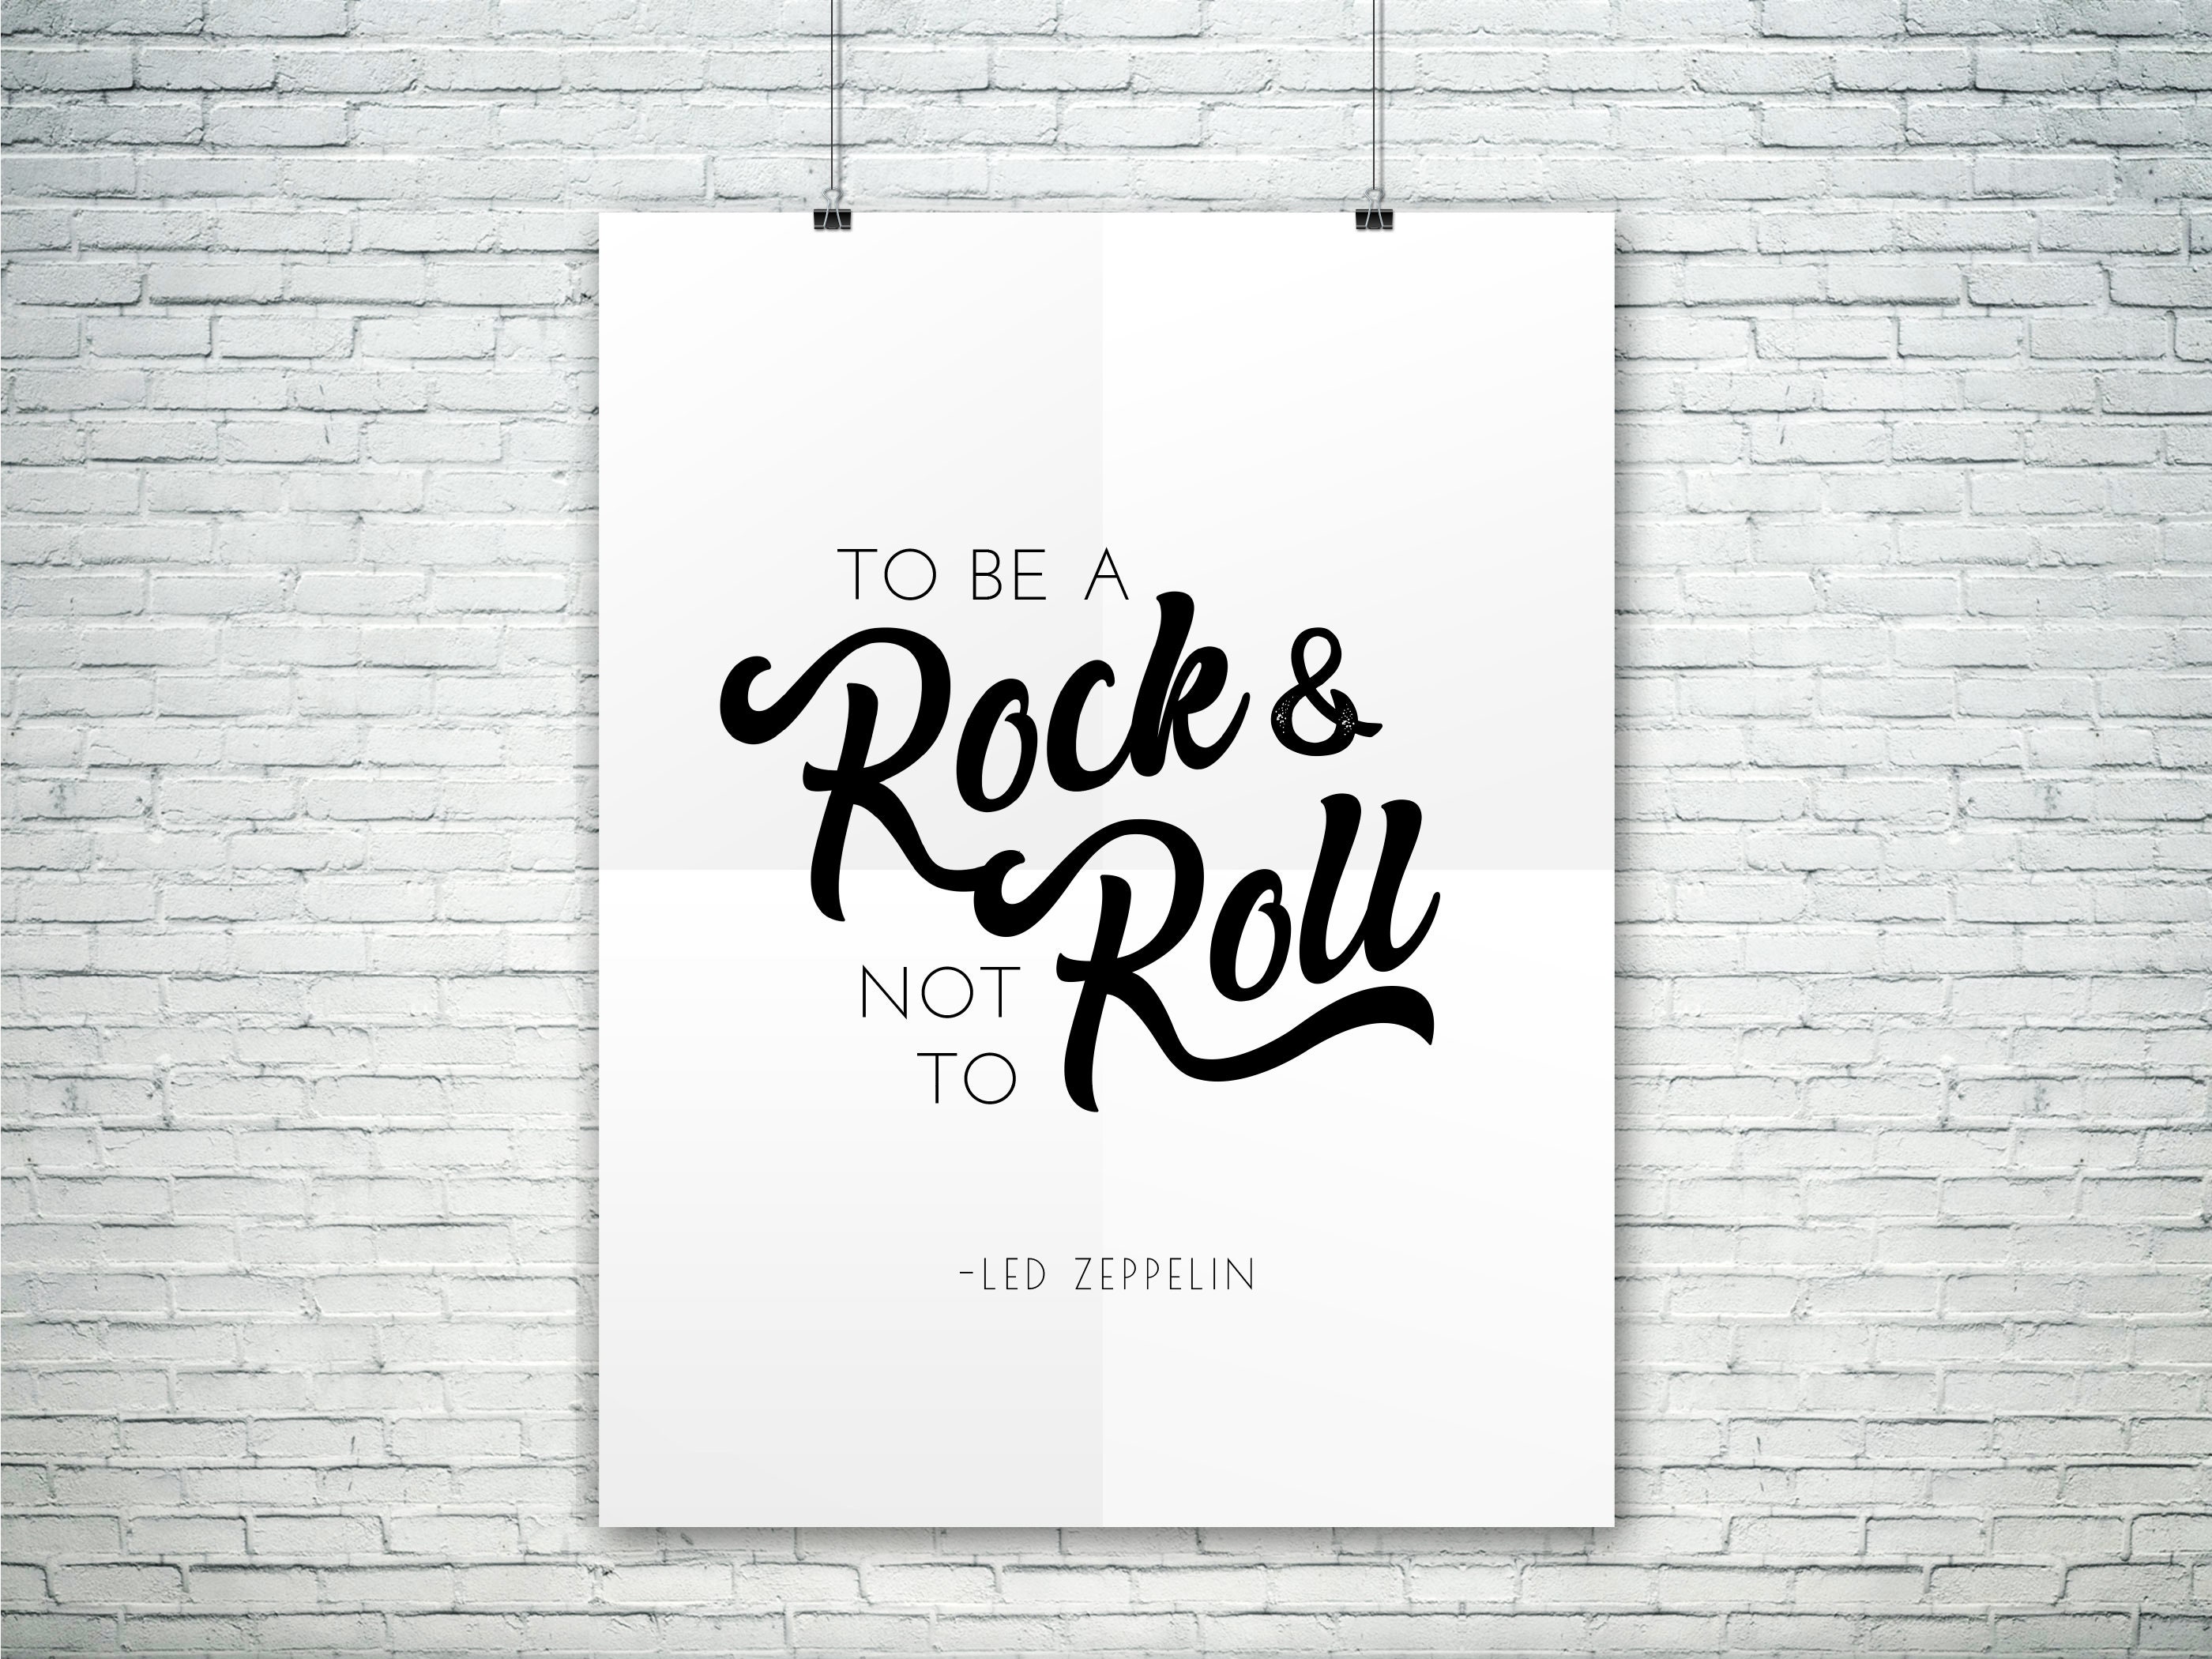 Led zeppelin rock and roll